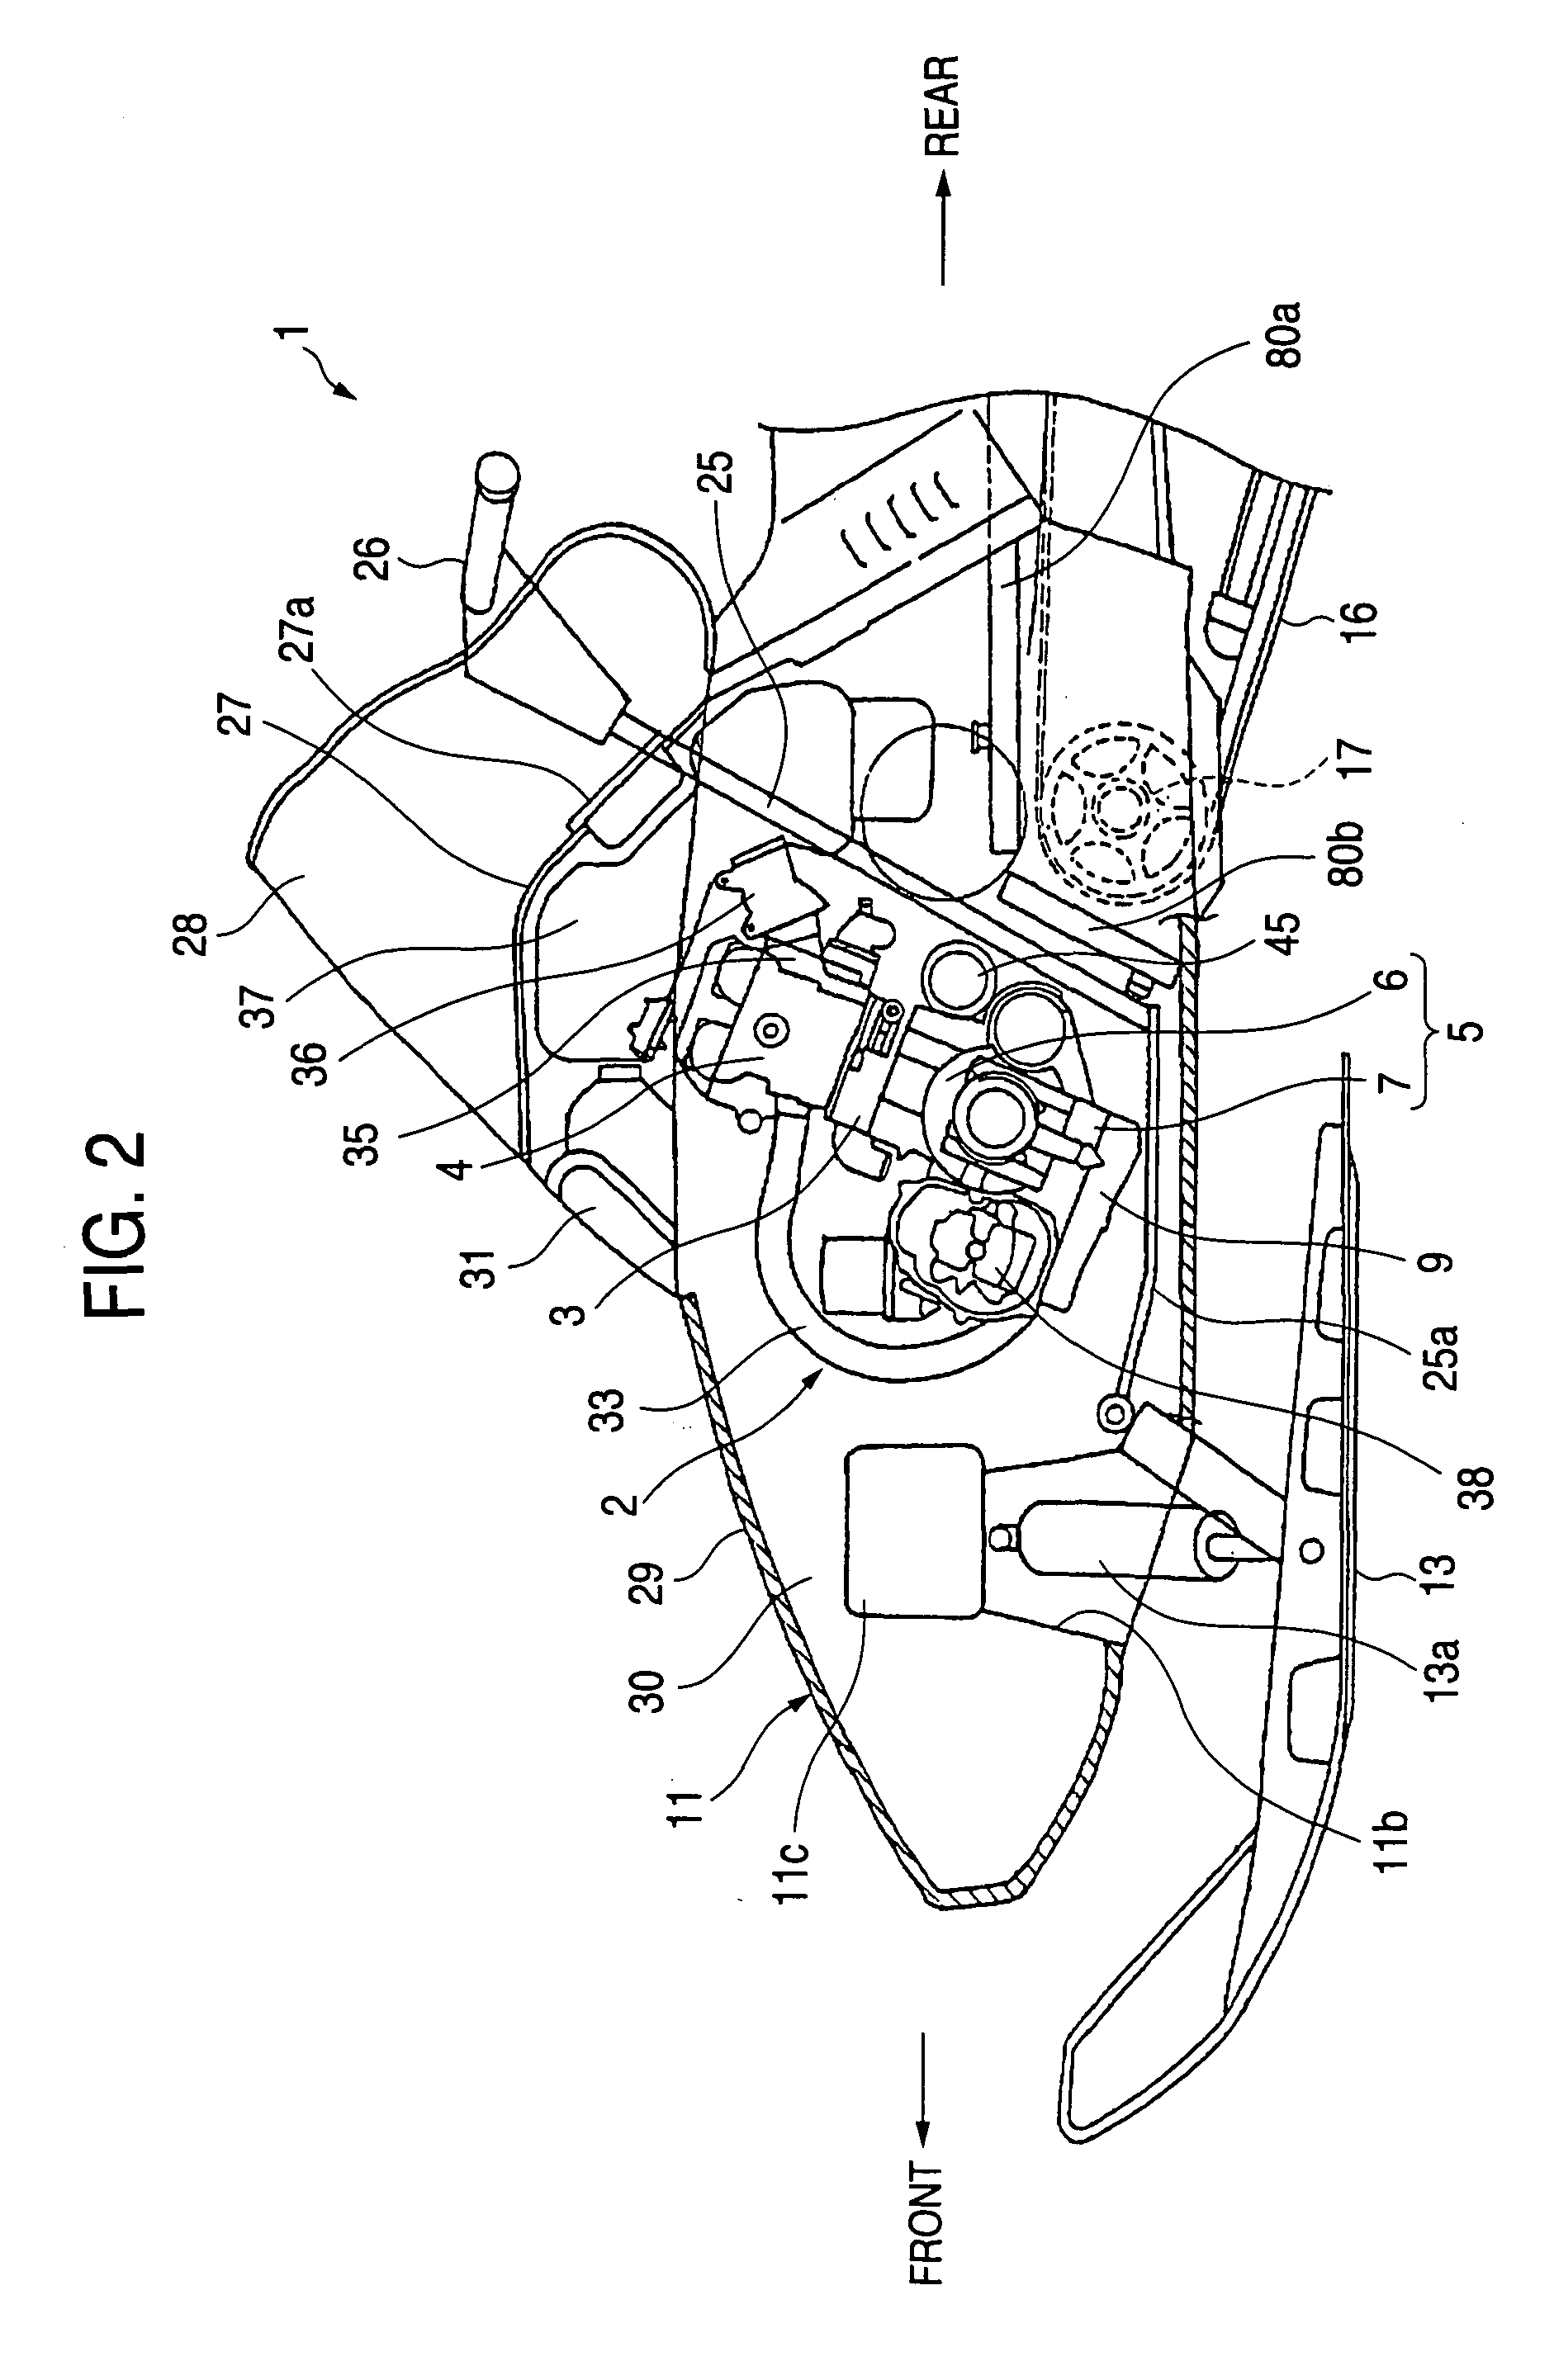 Oil pan structure for four-cycle engine